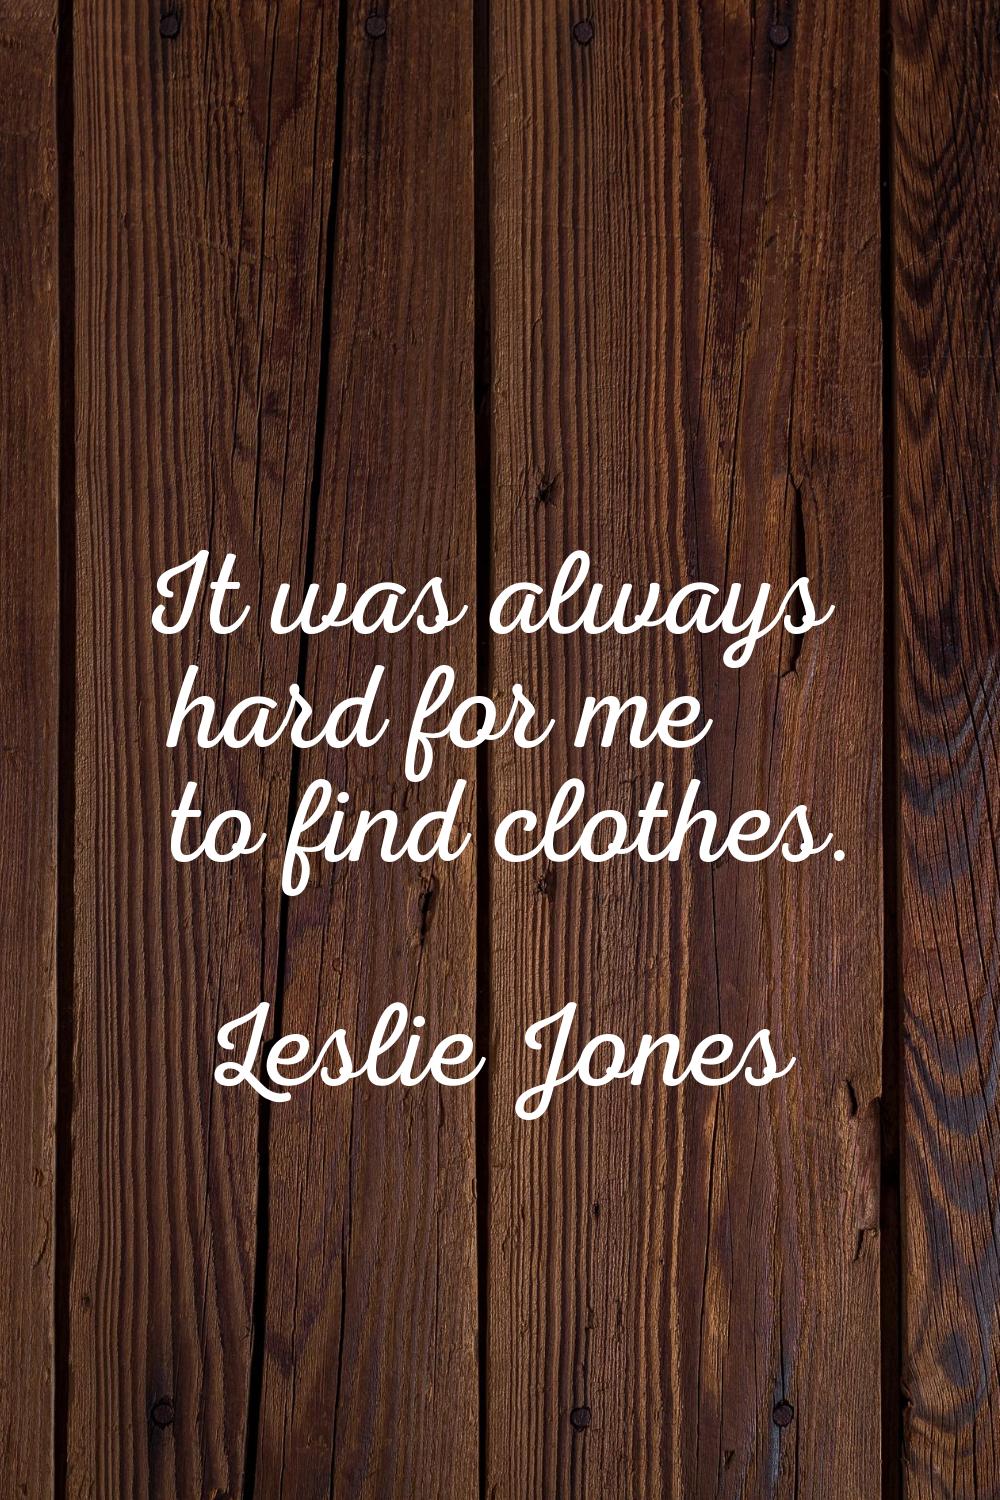 It was always hard for me to find clothes.